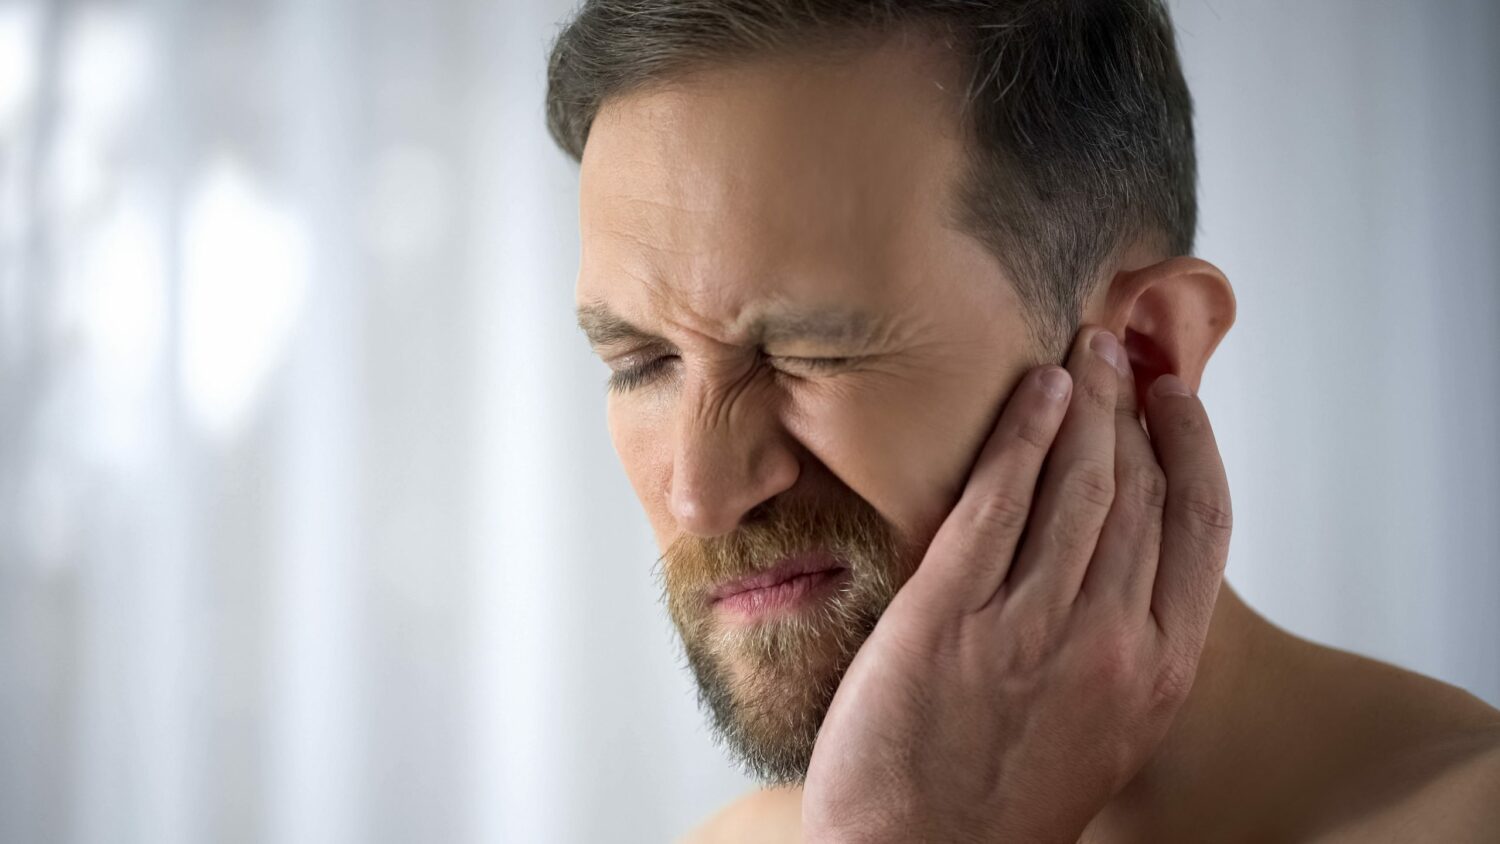 Ear Rumbling: Causes, Treatment, When to See a Doctor